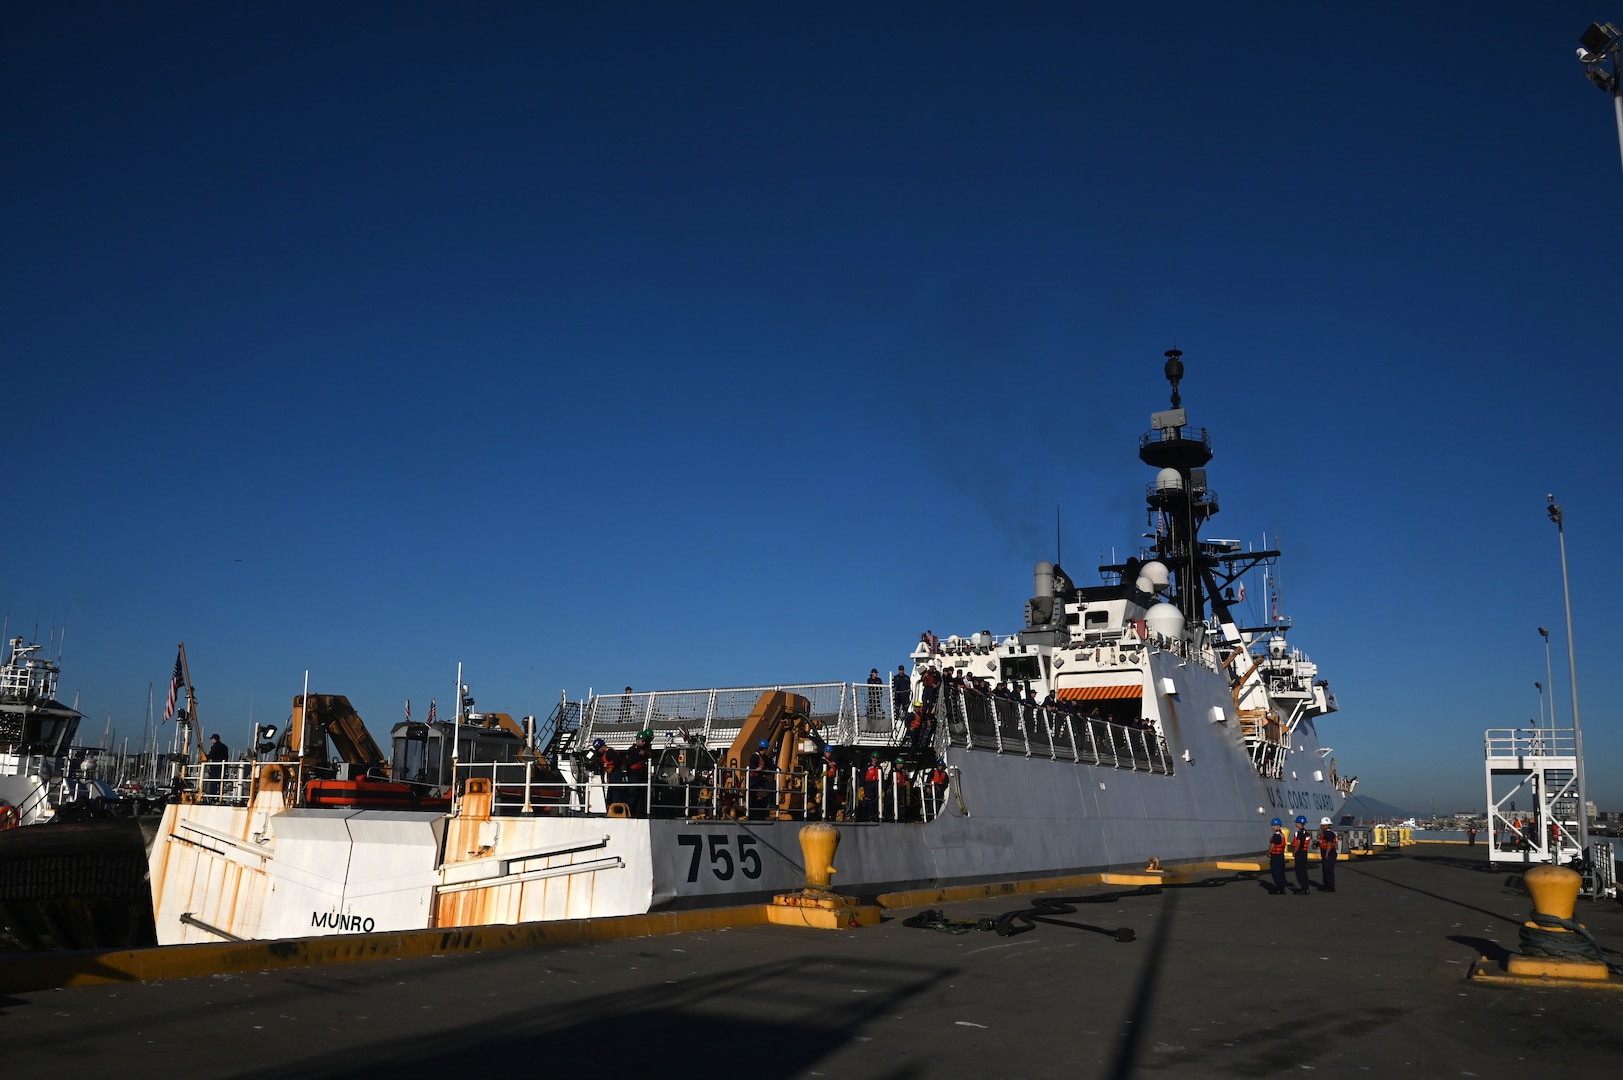 The crew aboard the U.S. Coast Guard Cutter Munro (WMSL 755) prepare to moor to the Base Alameda, California, pier after returning home from a 118-day Western Pacific deployment, Oct. 18. 2023. Munro's crew conducted a 23,000-mile, multi-month Western Pacific patrol operating in support of the U.S. Navy's Seventh Fleet by conducting multiple engagements with partner nations promoting a free and open Indo-Pacific. U.S. Coast Guard photo by Chief Petty Officer Matthew S. Masaschi.